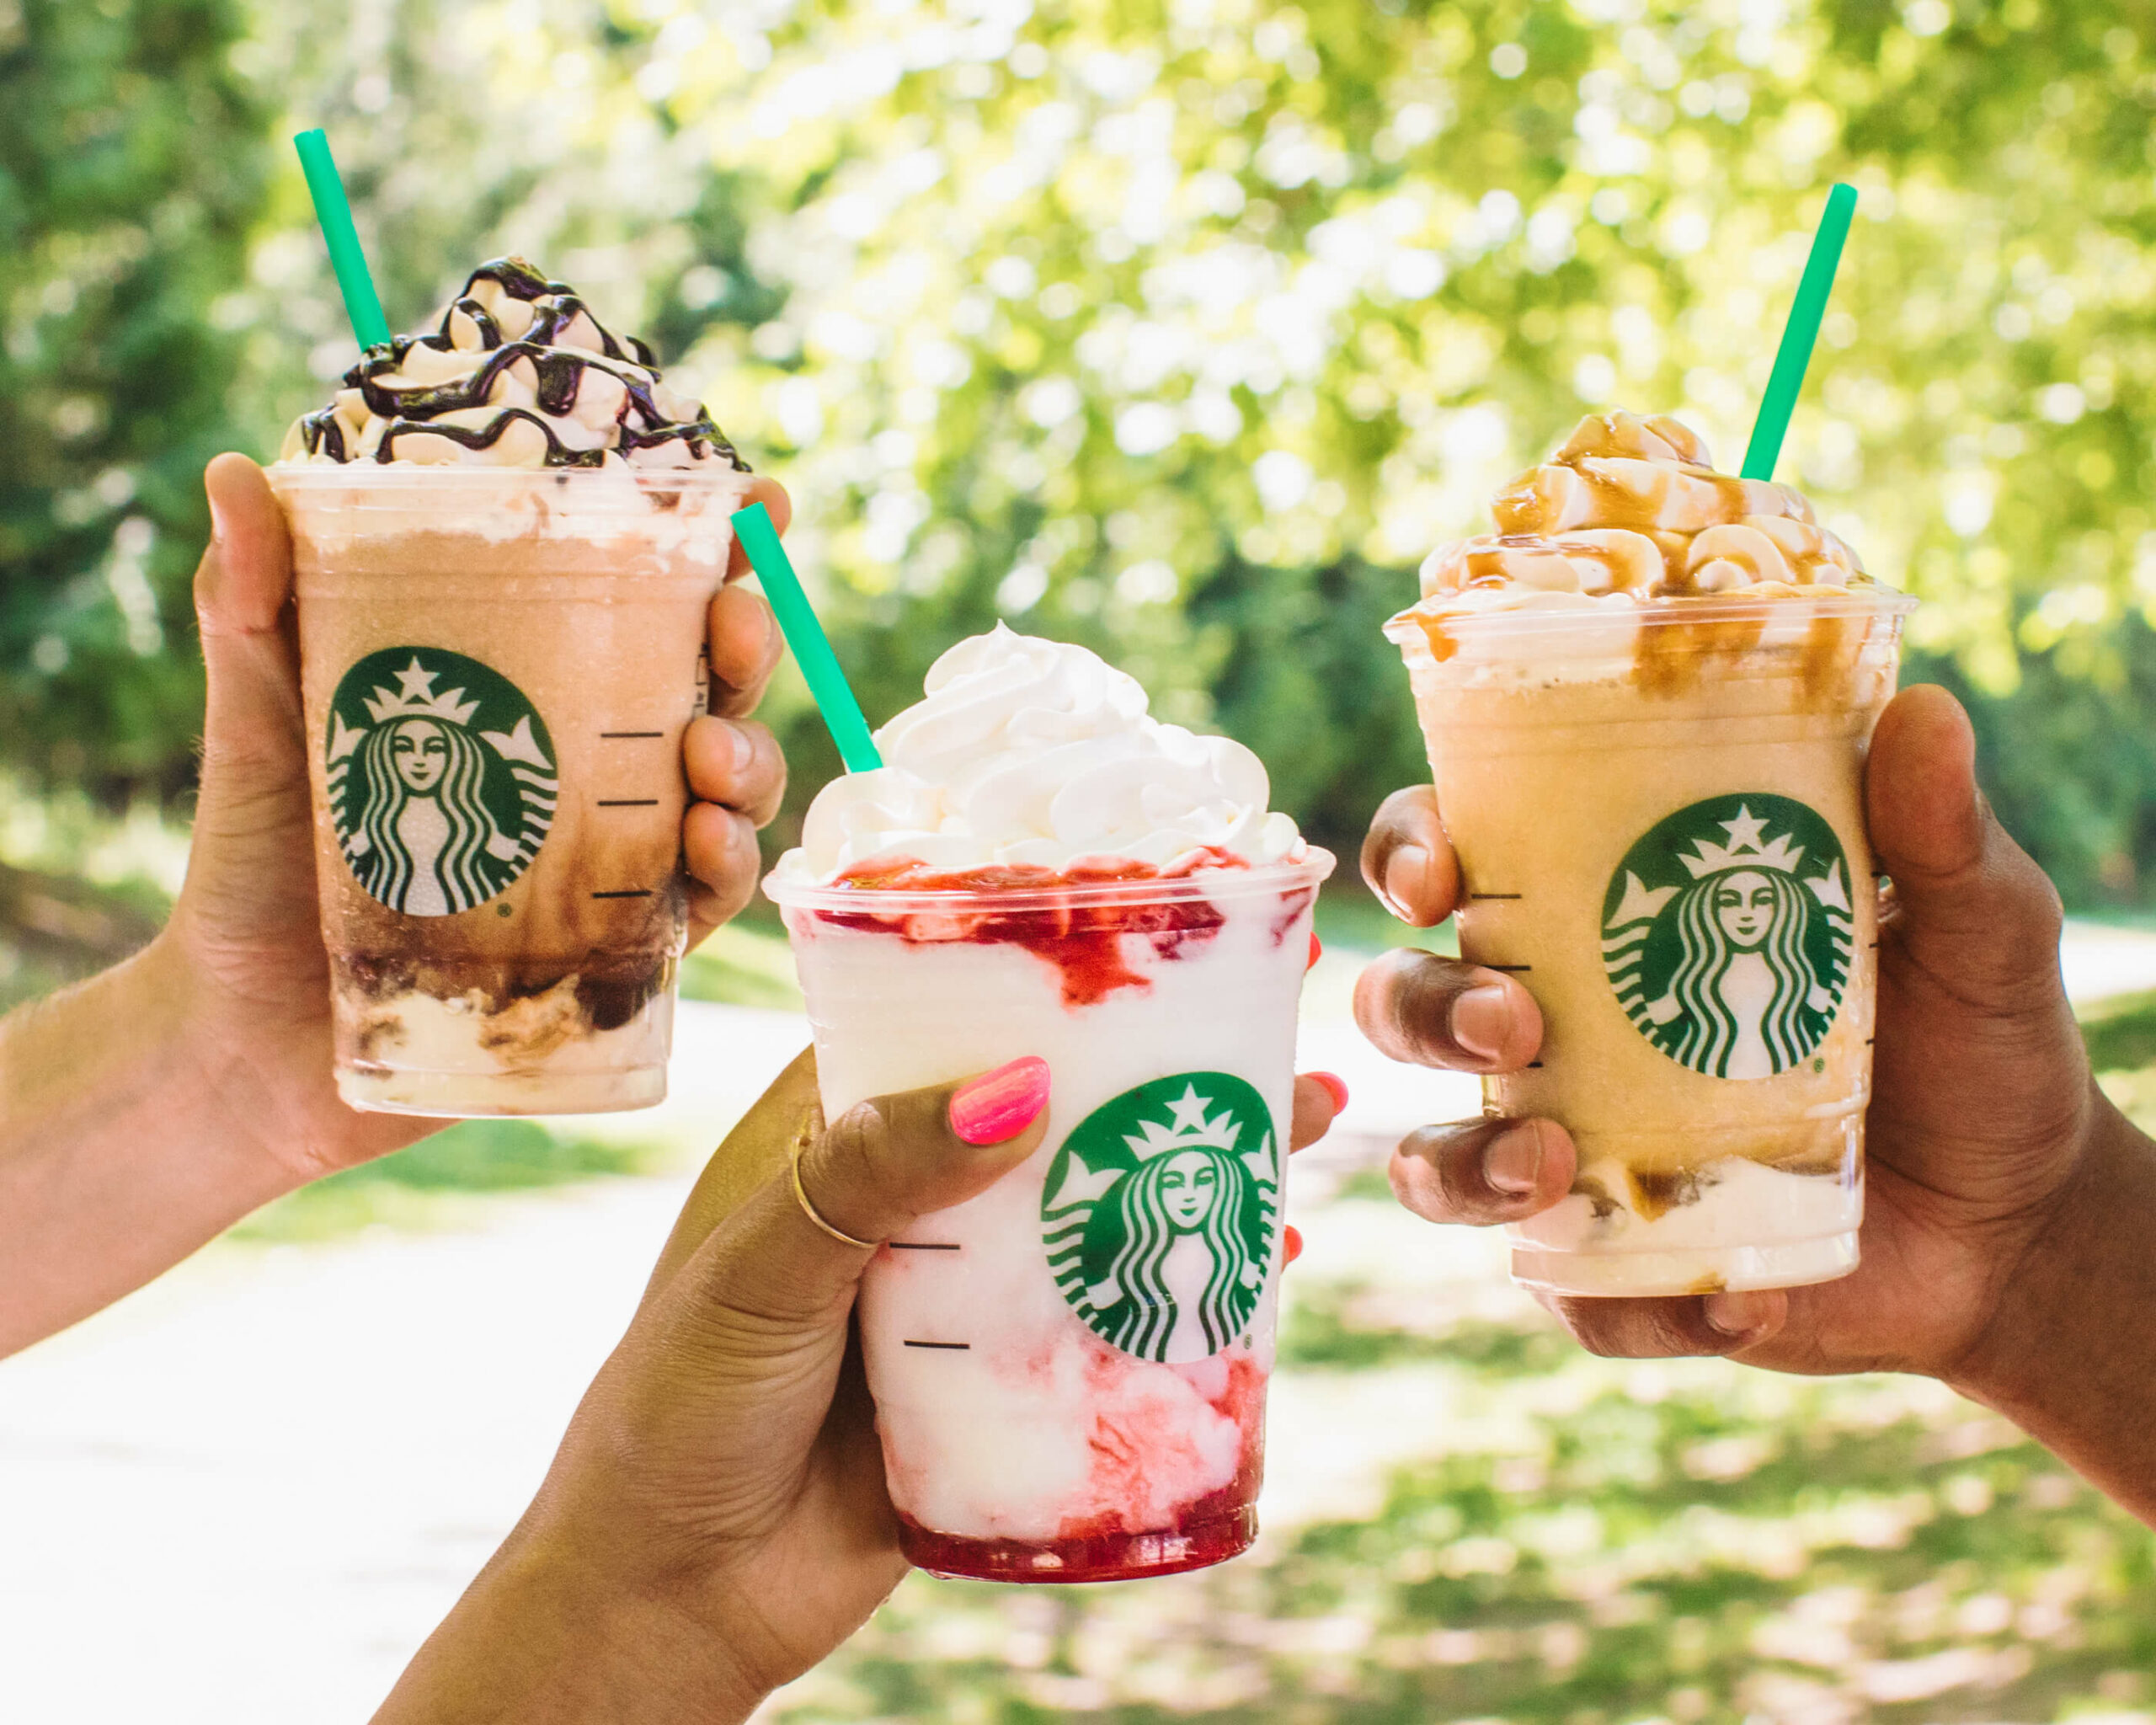 What is the best thing to order on Starbucks?